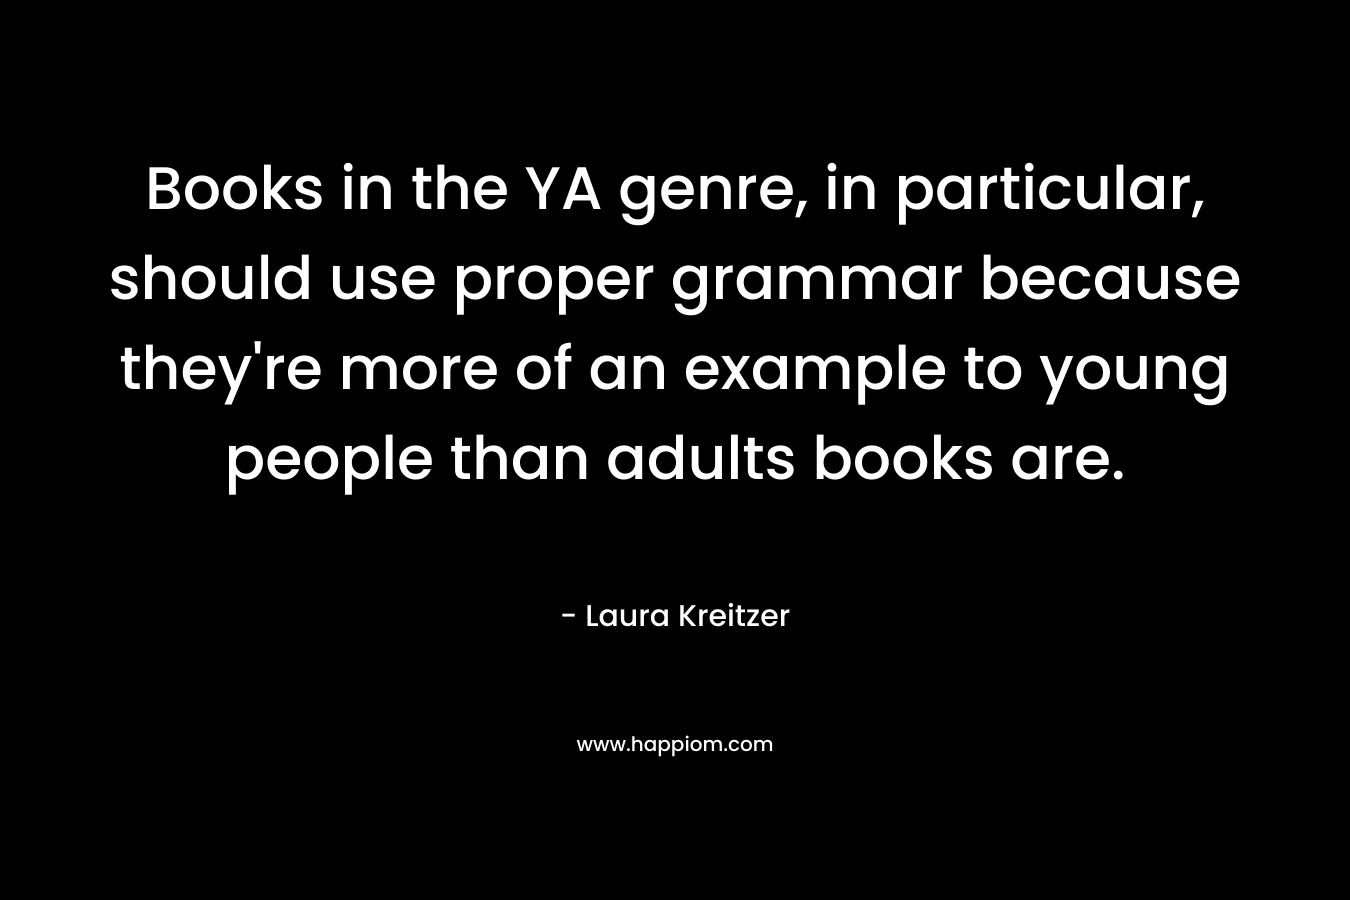 Books in the YA genre, in particular, should use proper grammar because they’re more of an example to young people than adults books are. – Laura Kreitzer